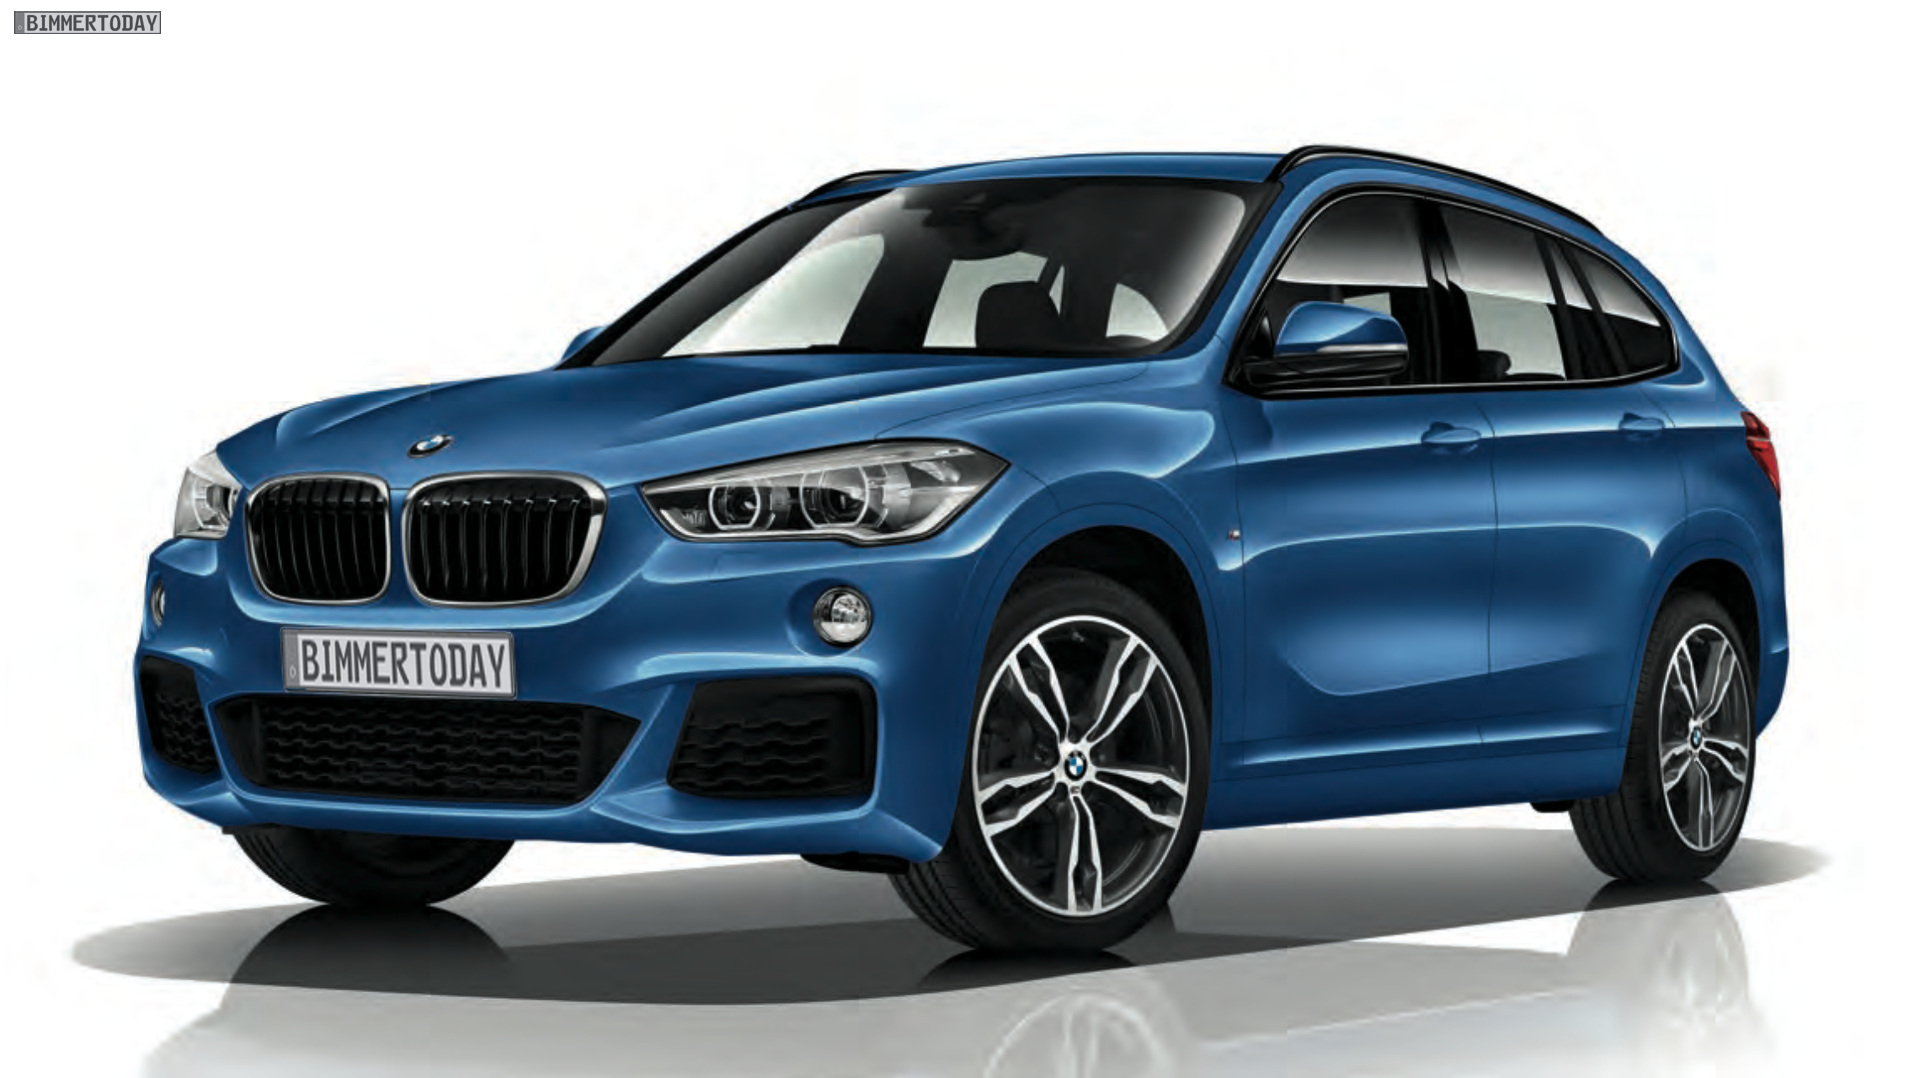 BMW X1 M - An SUV that would rock